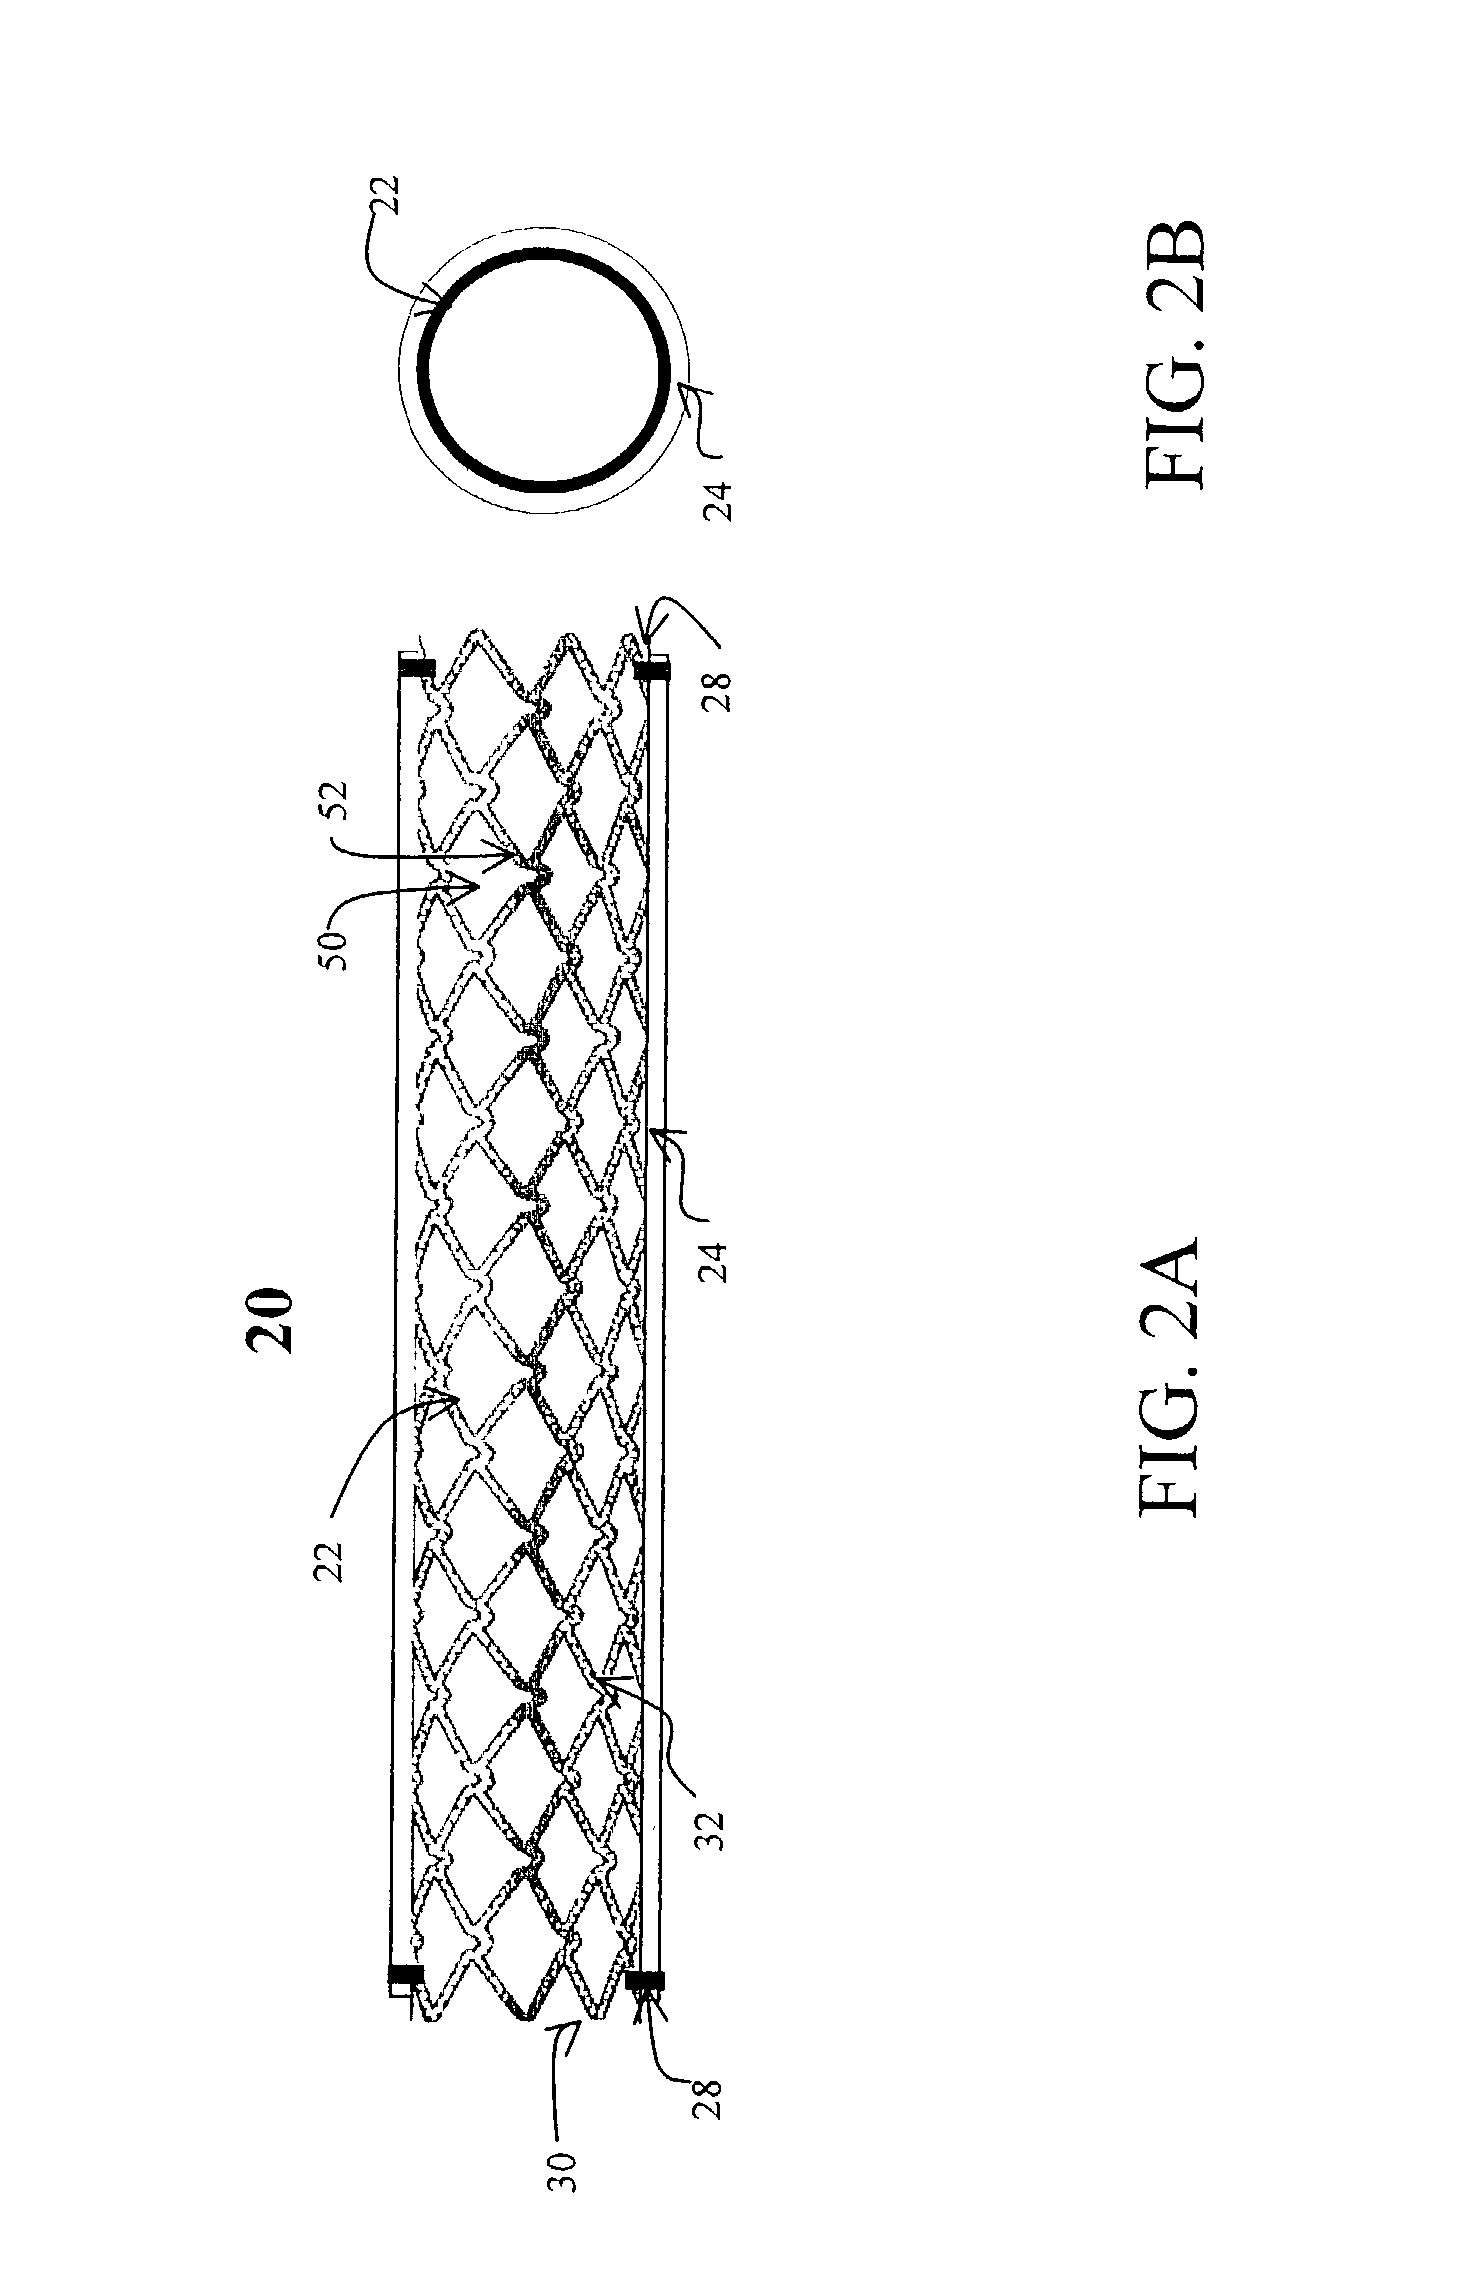 Stent having cover with drug delivery capability